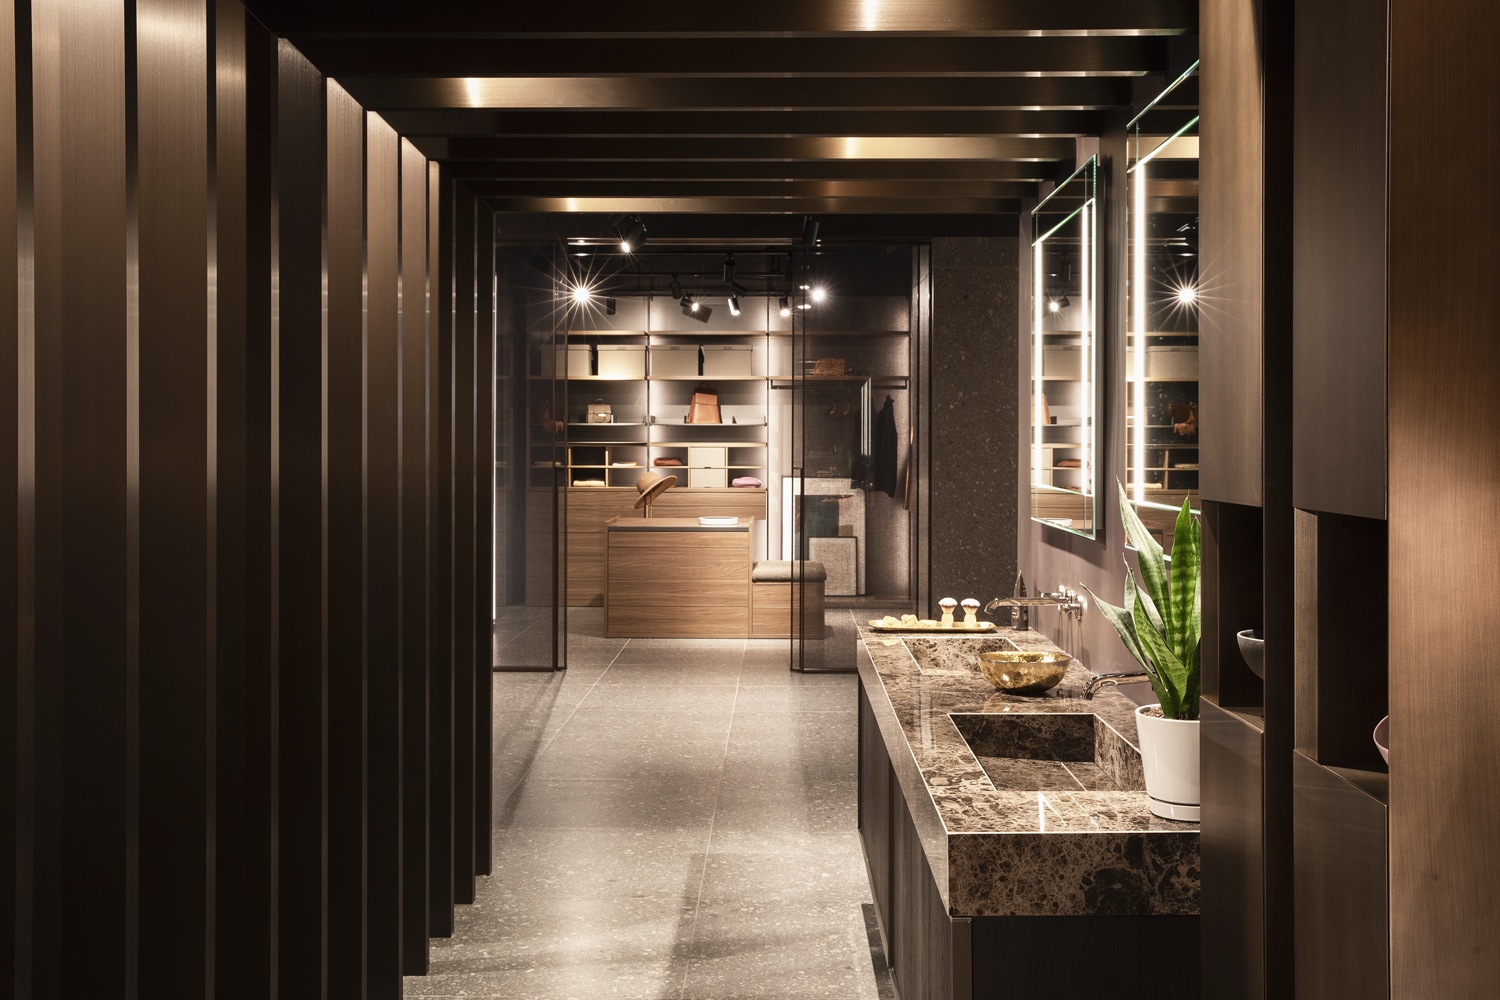 Bathroom and closet cabinetry within the showroom design by Italian architect, Mario Mazzer.